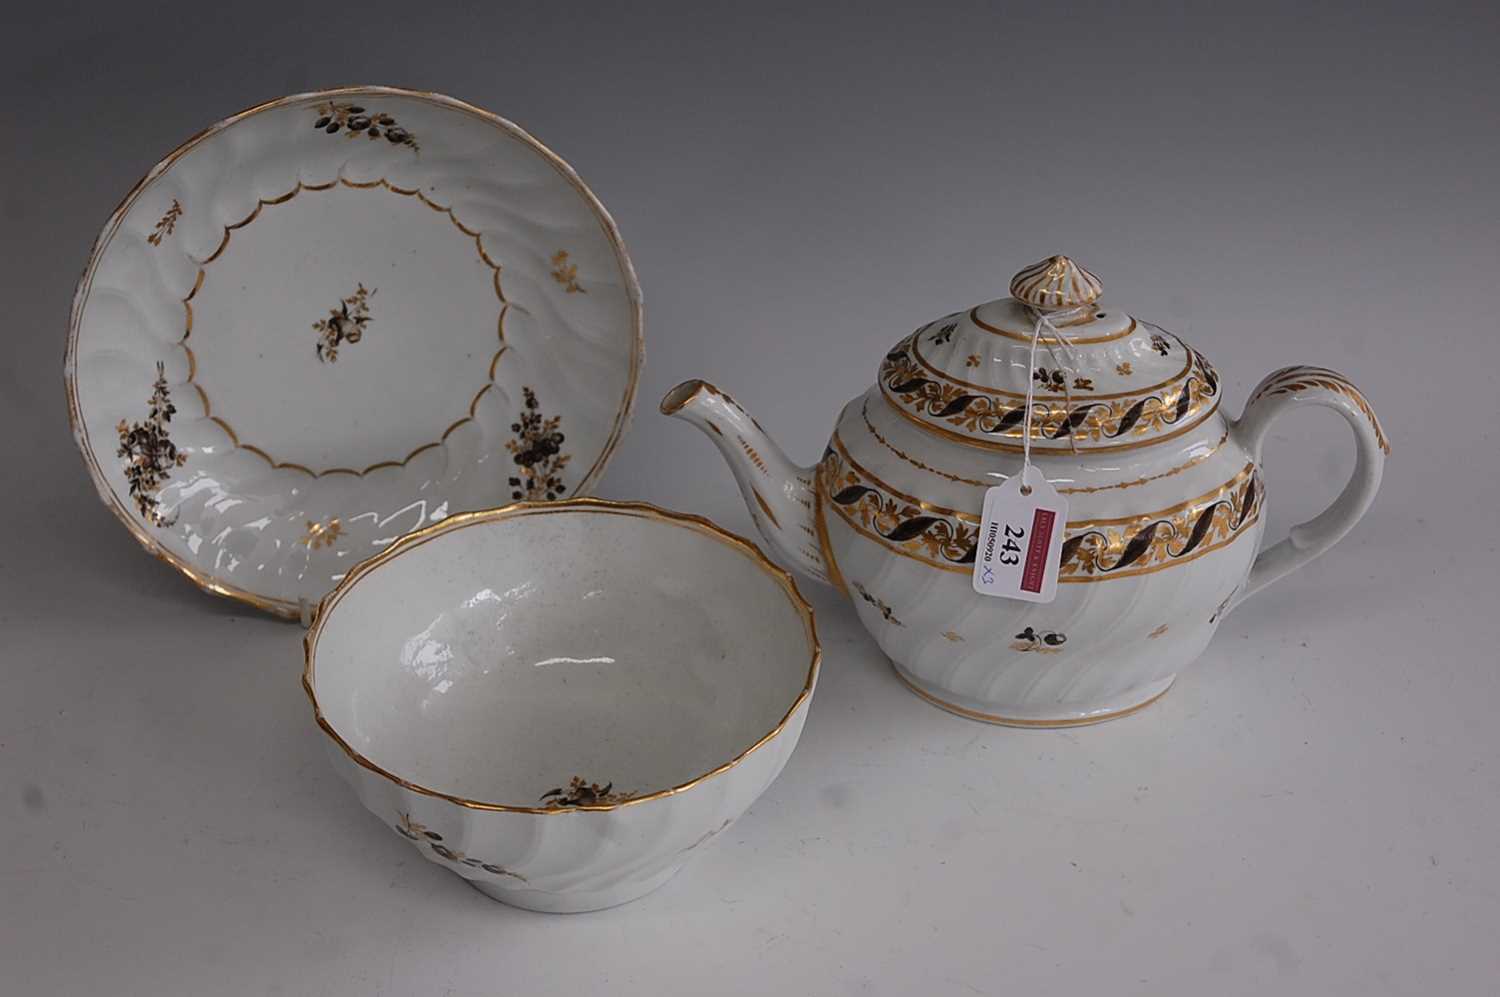 A late 18th century Chamberlain Worcester teapot together with accompanying near matching slop